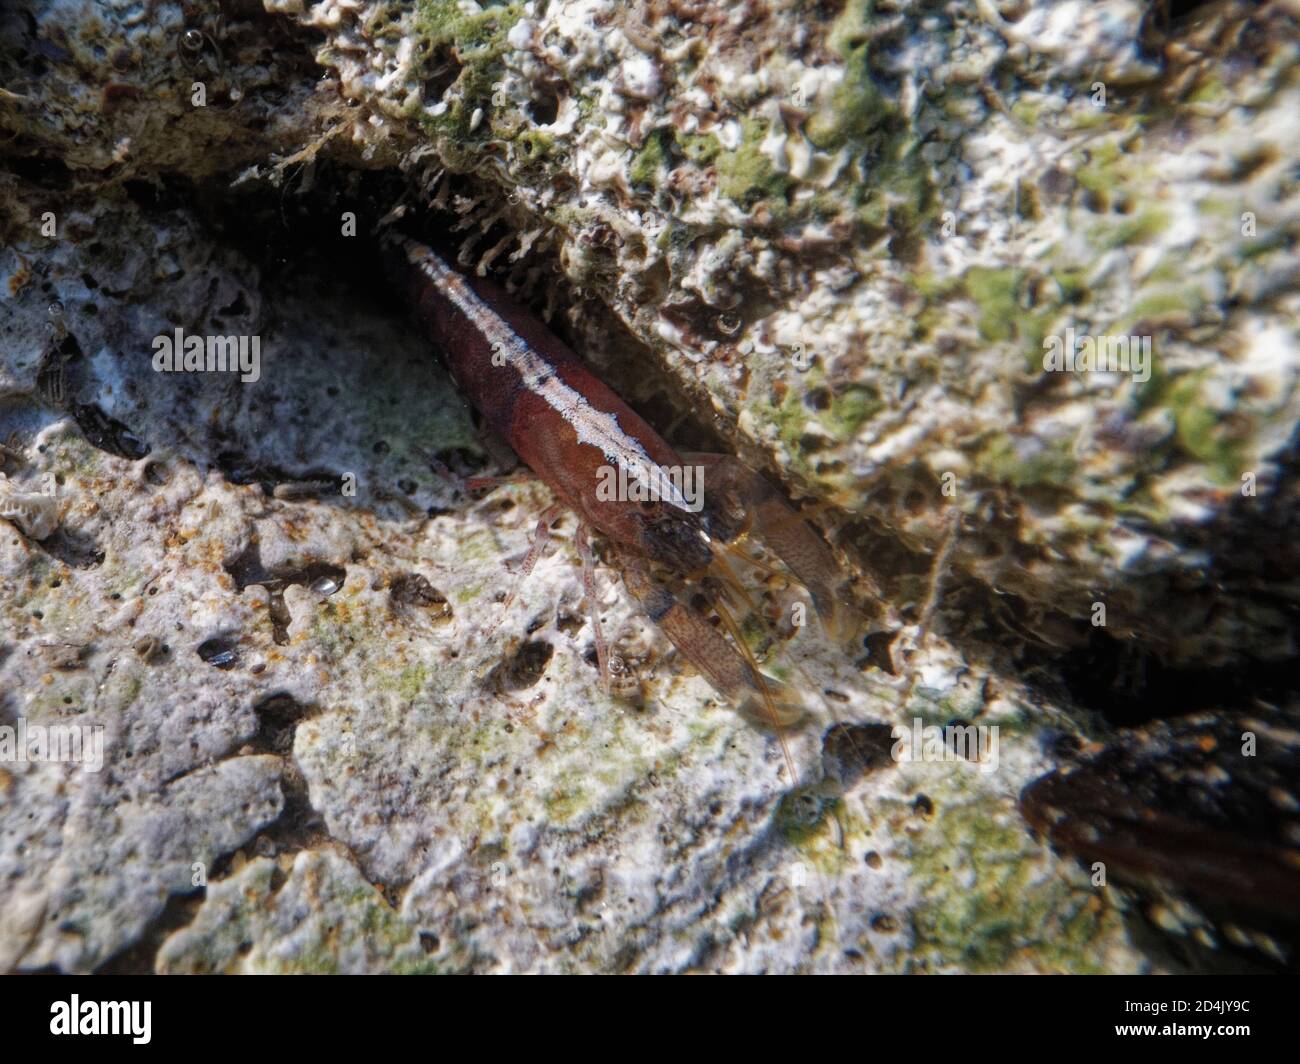 Hooded shrimp (Athanas nitescens) in a rock pool low on the shore, The Gower, Wales, UK, September. Stock Photo